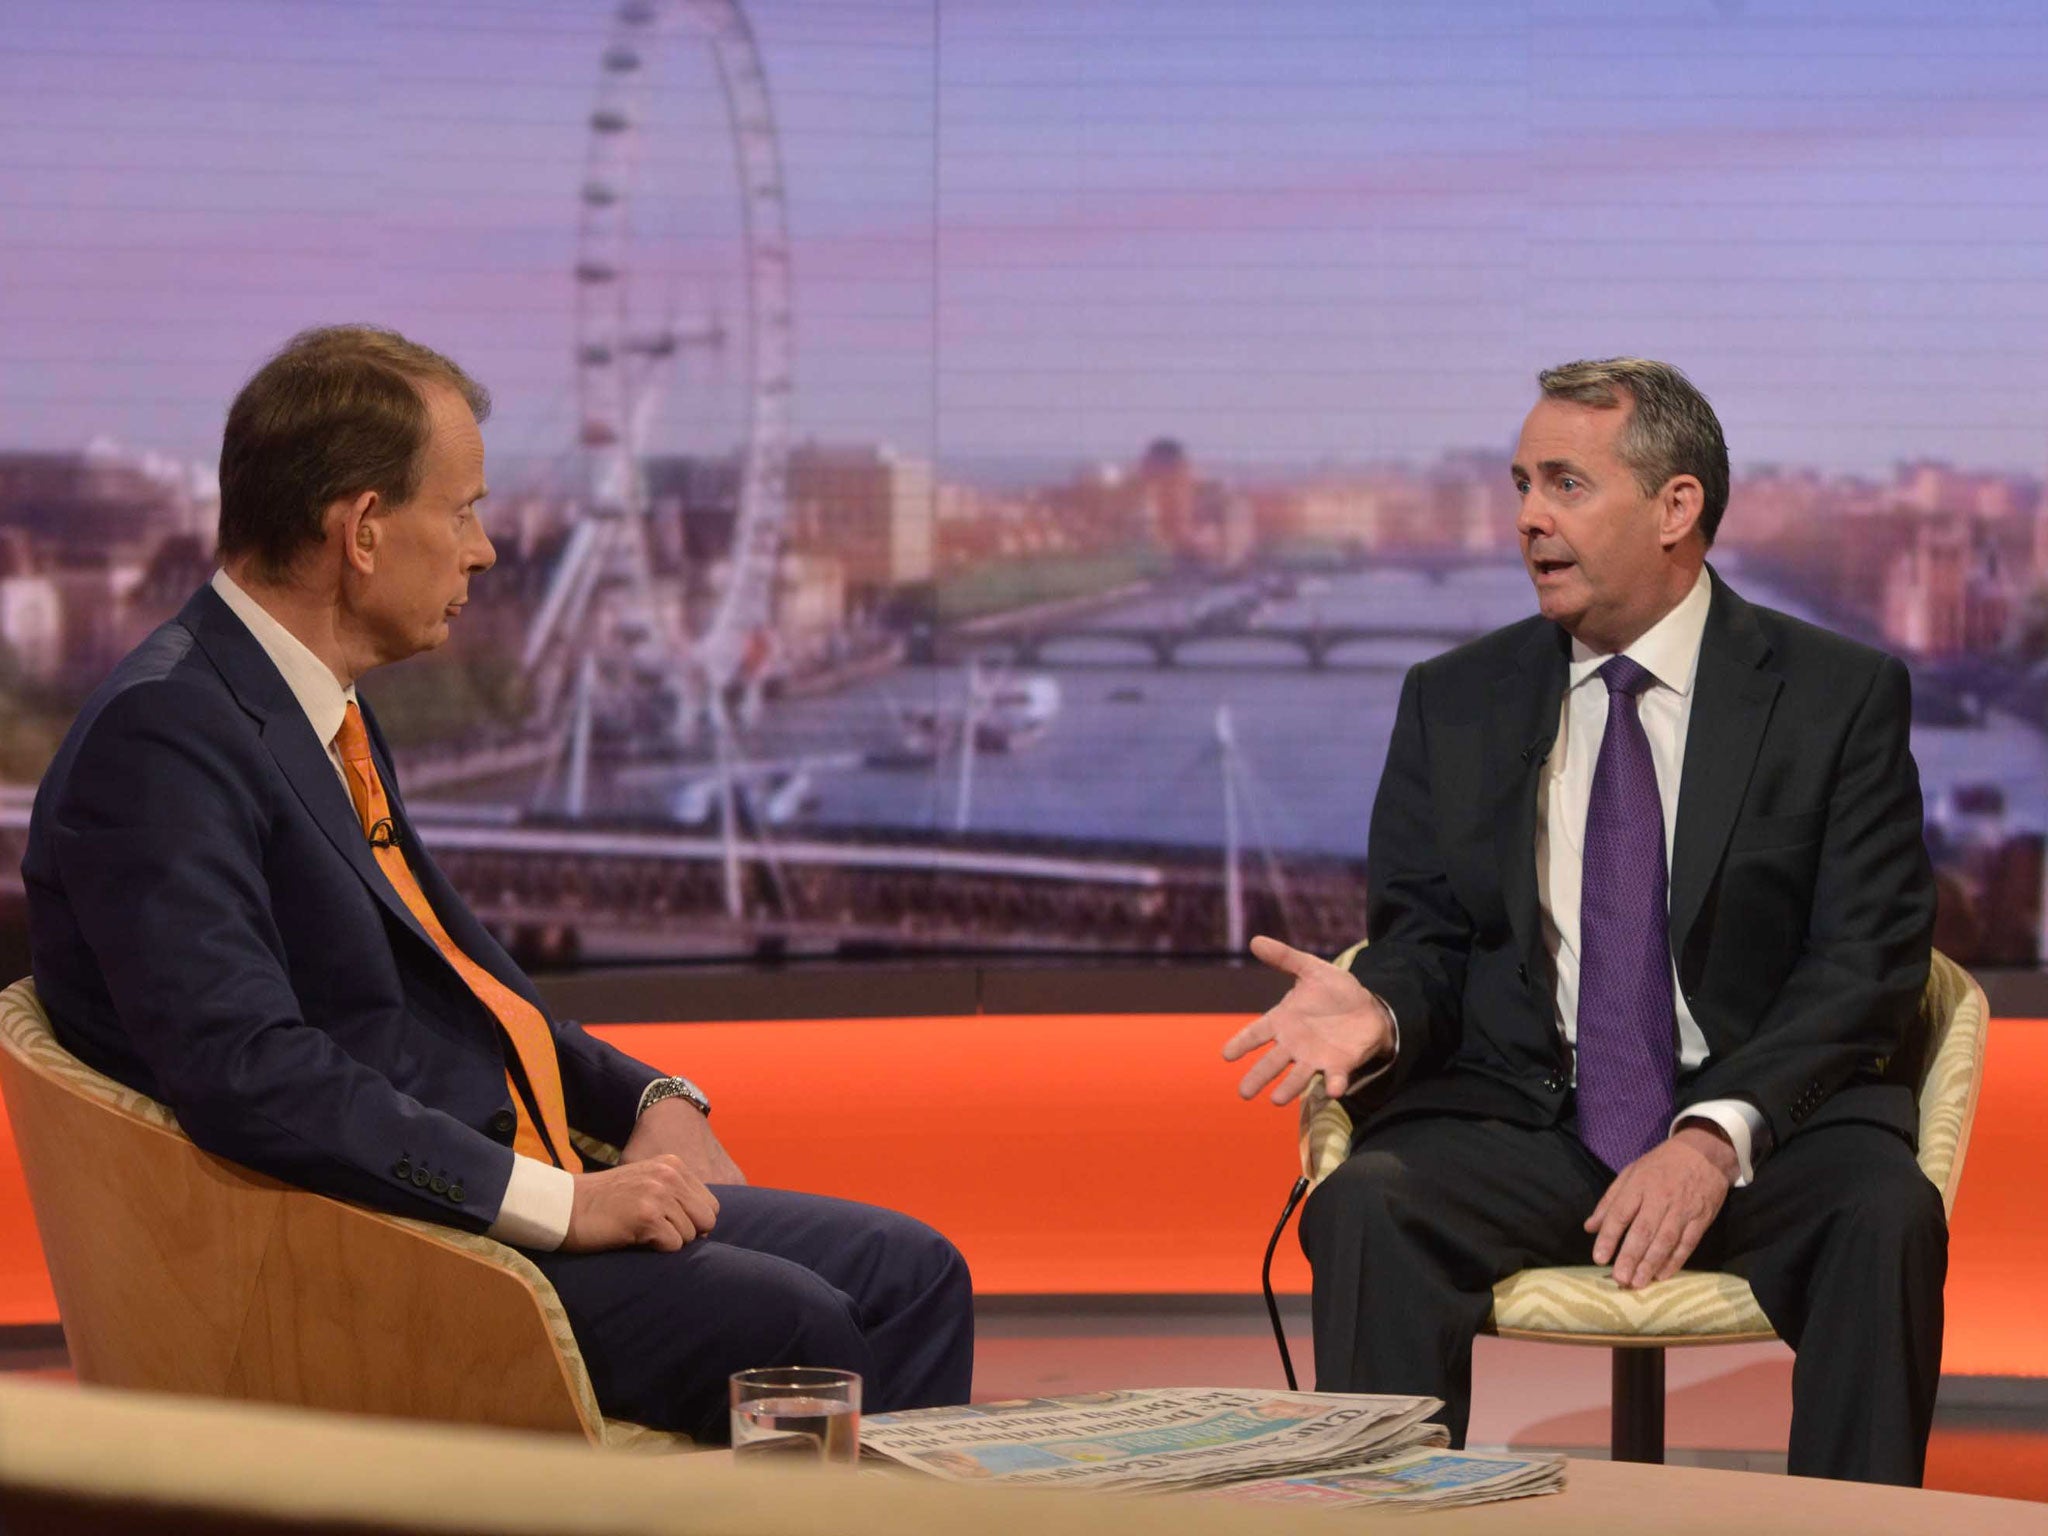 Andrew Marr interviews the former Defence Secretary Liam Fox for his BBC show